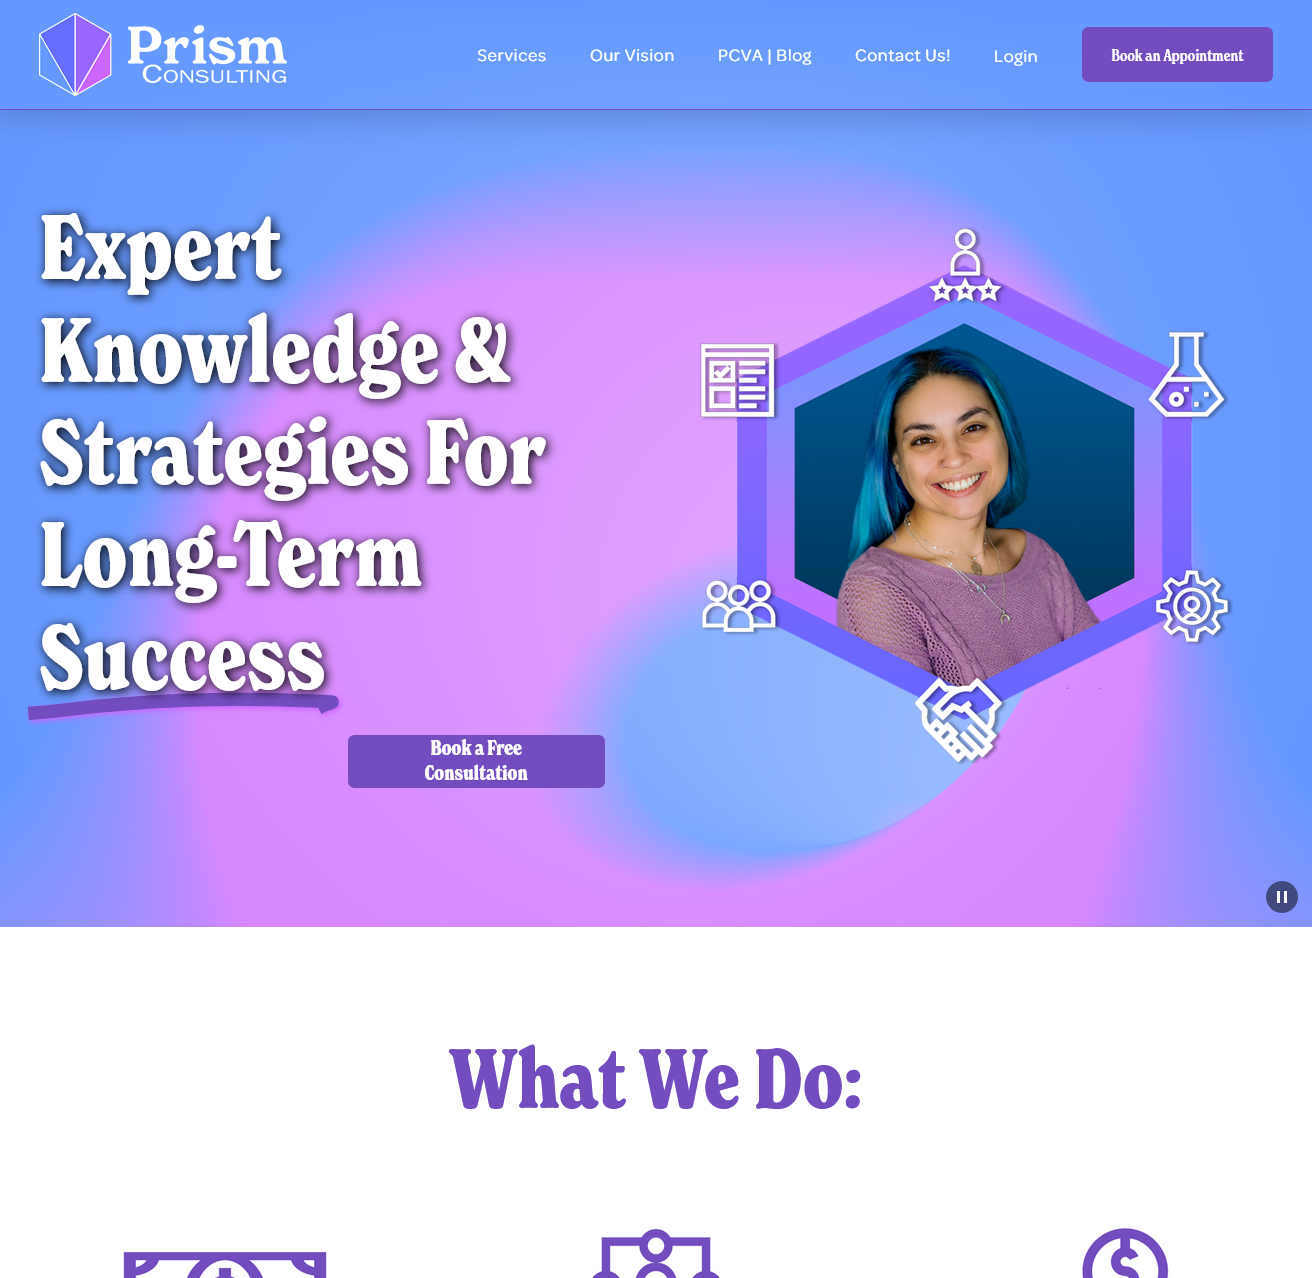 Cover Image for Squarespace Redesign for Prism Consulting, VA: A Vibrant and Innovative HR Platform